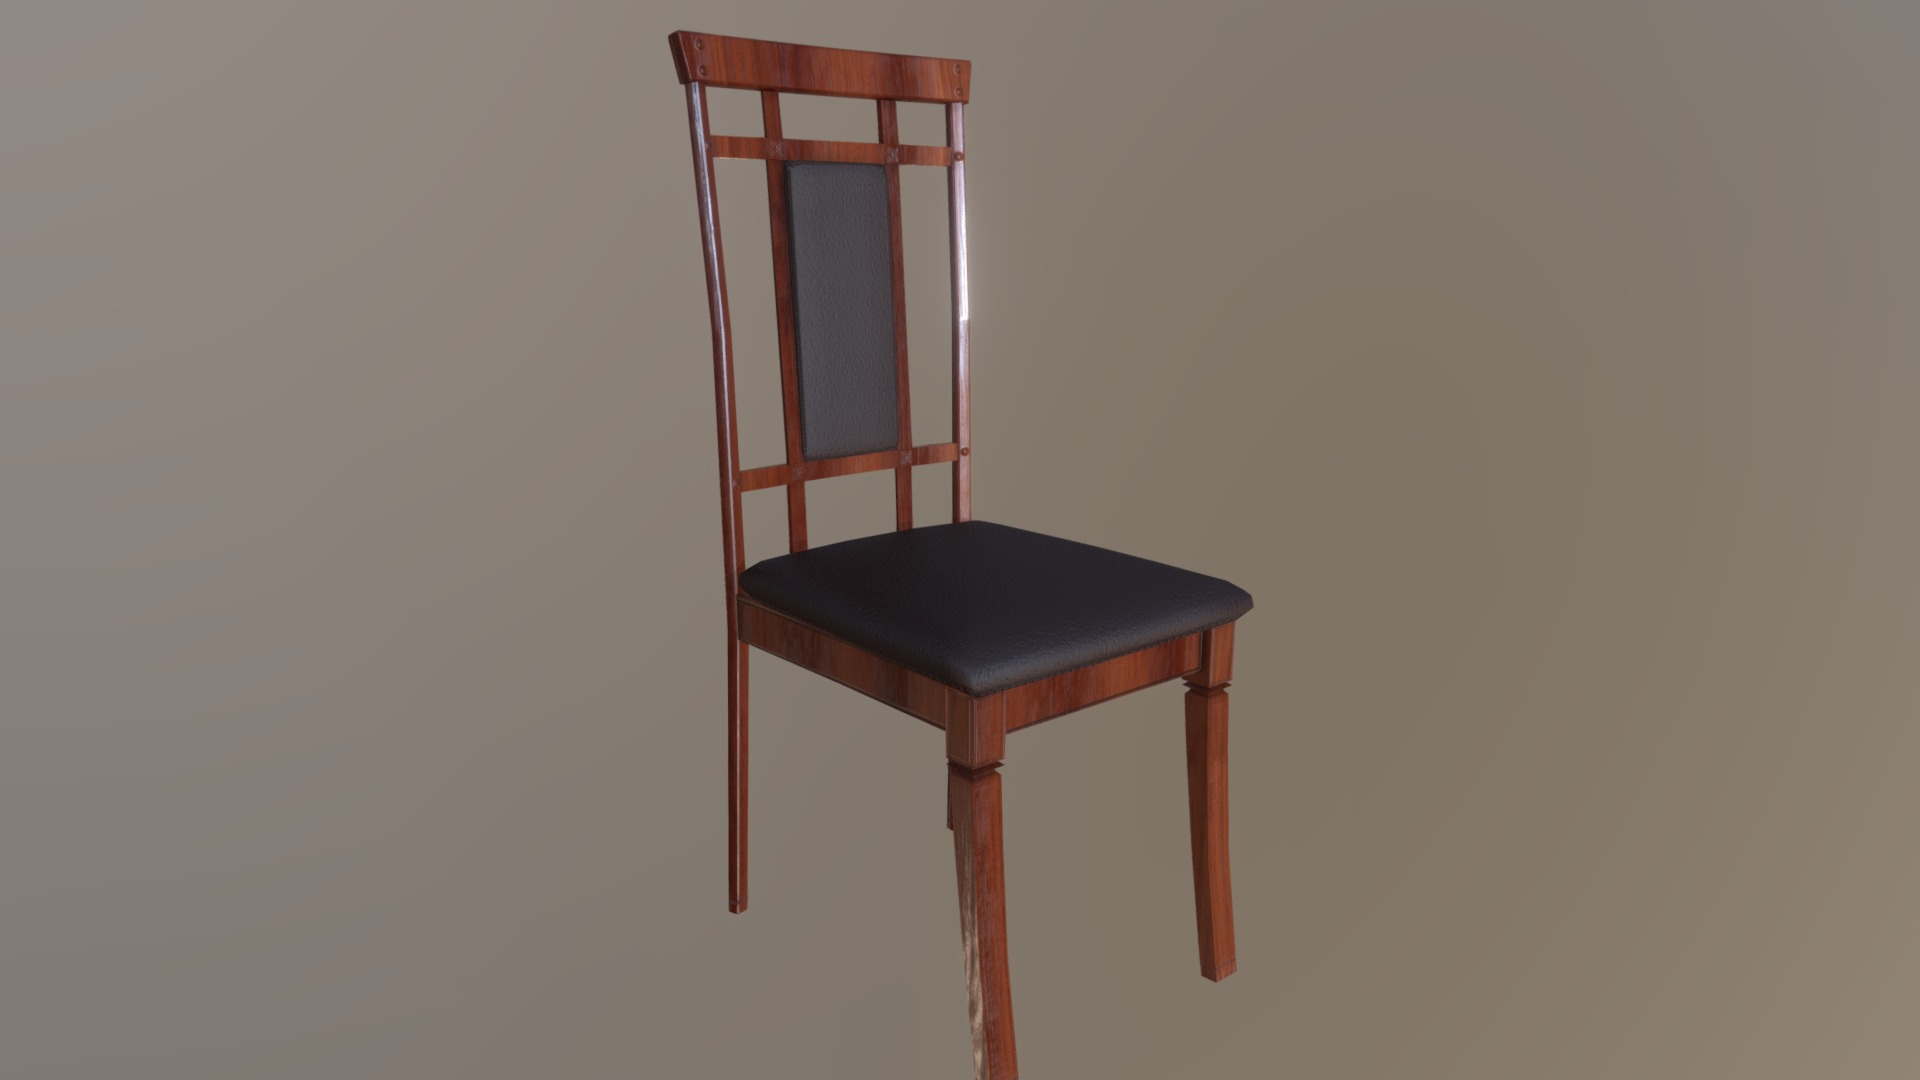 3D model Superfuntimes Diningroom Chair - This is a 3D model of the Superfuntimes Diningroom Chair. The 3D model is about a chair with a cushion.